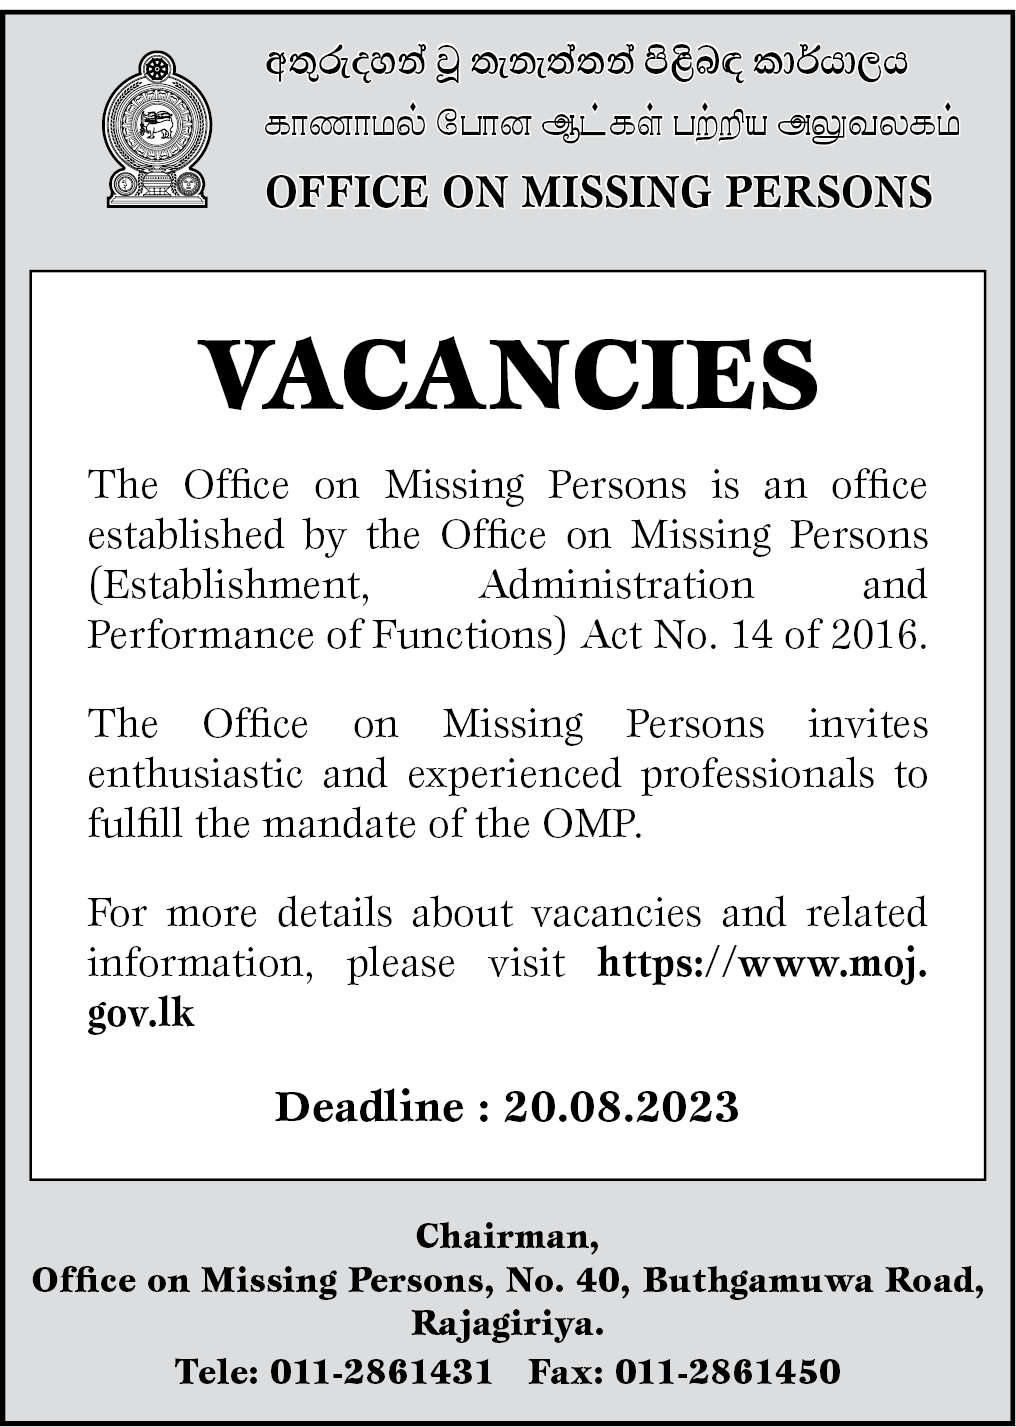 The Office on Missing Persons (OMP) Job Vacancies - 2023 August